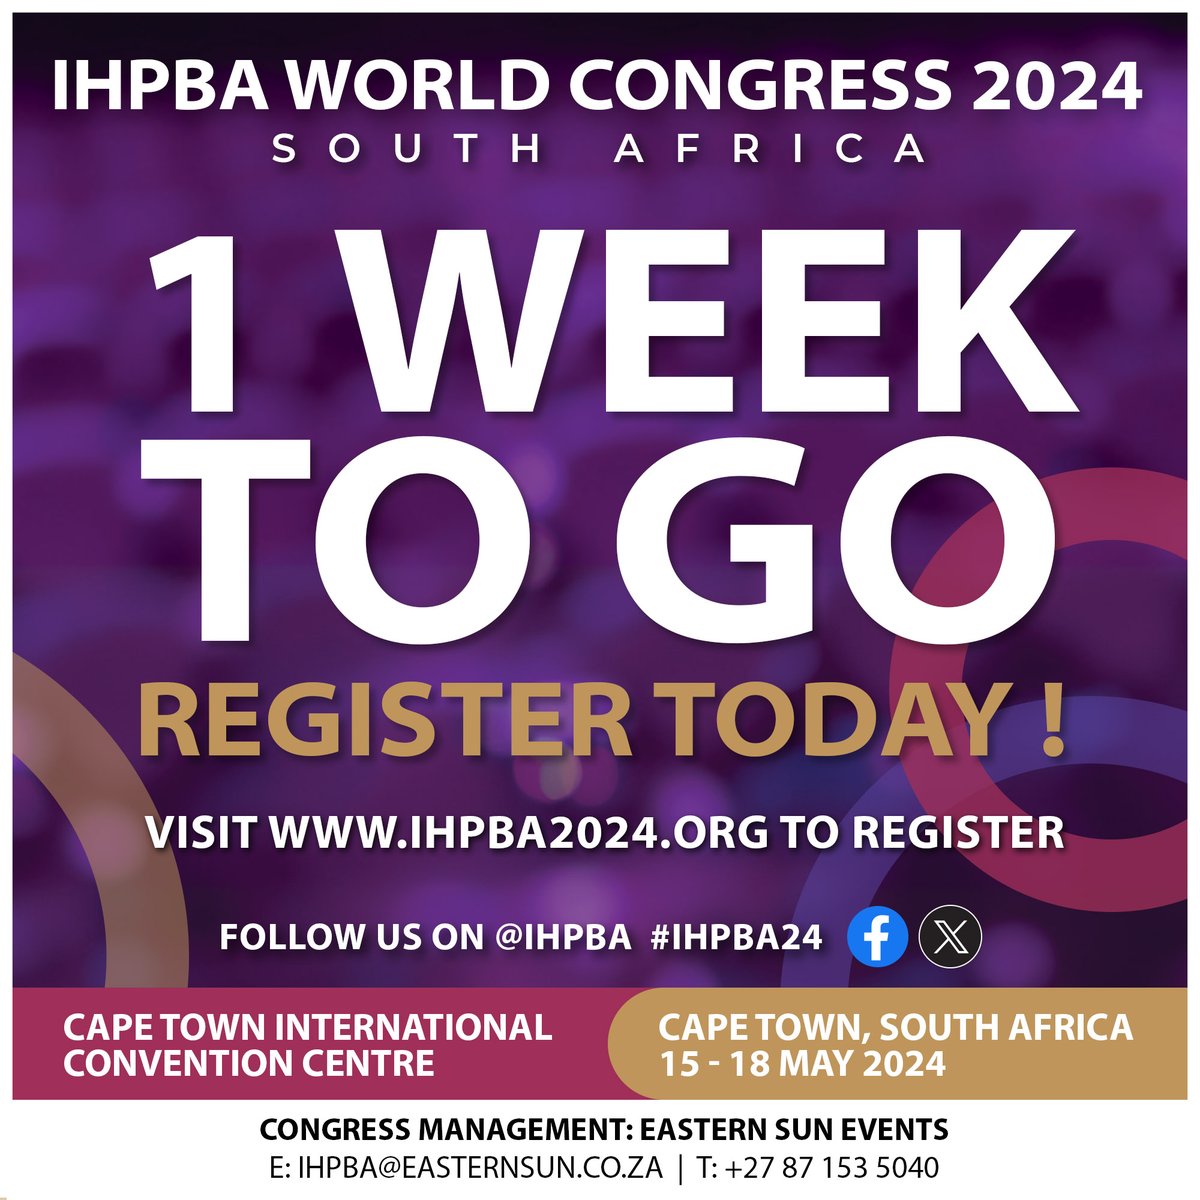 Only 1 week until the IHPBA 2024 World Congress in Cape Town, South Africa. There is still time to register on ihpba2024.org. If you can’t make it in person, register for our virtual congress and enjoy simultaneous translation in over 50 languages.